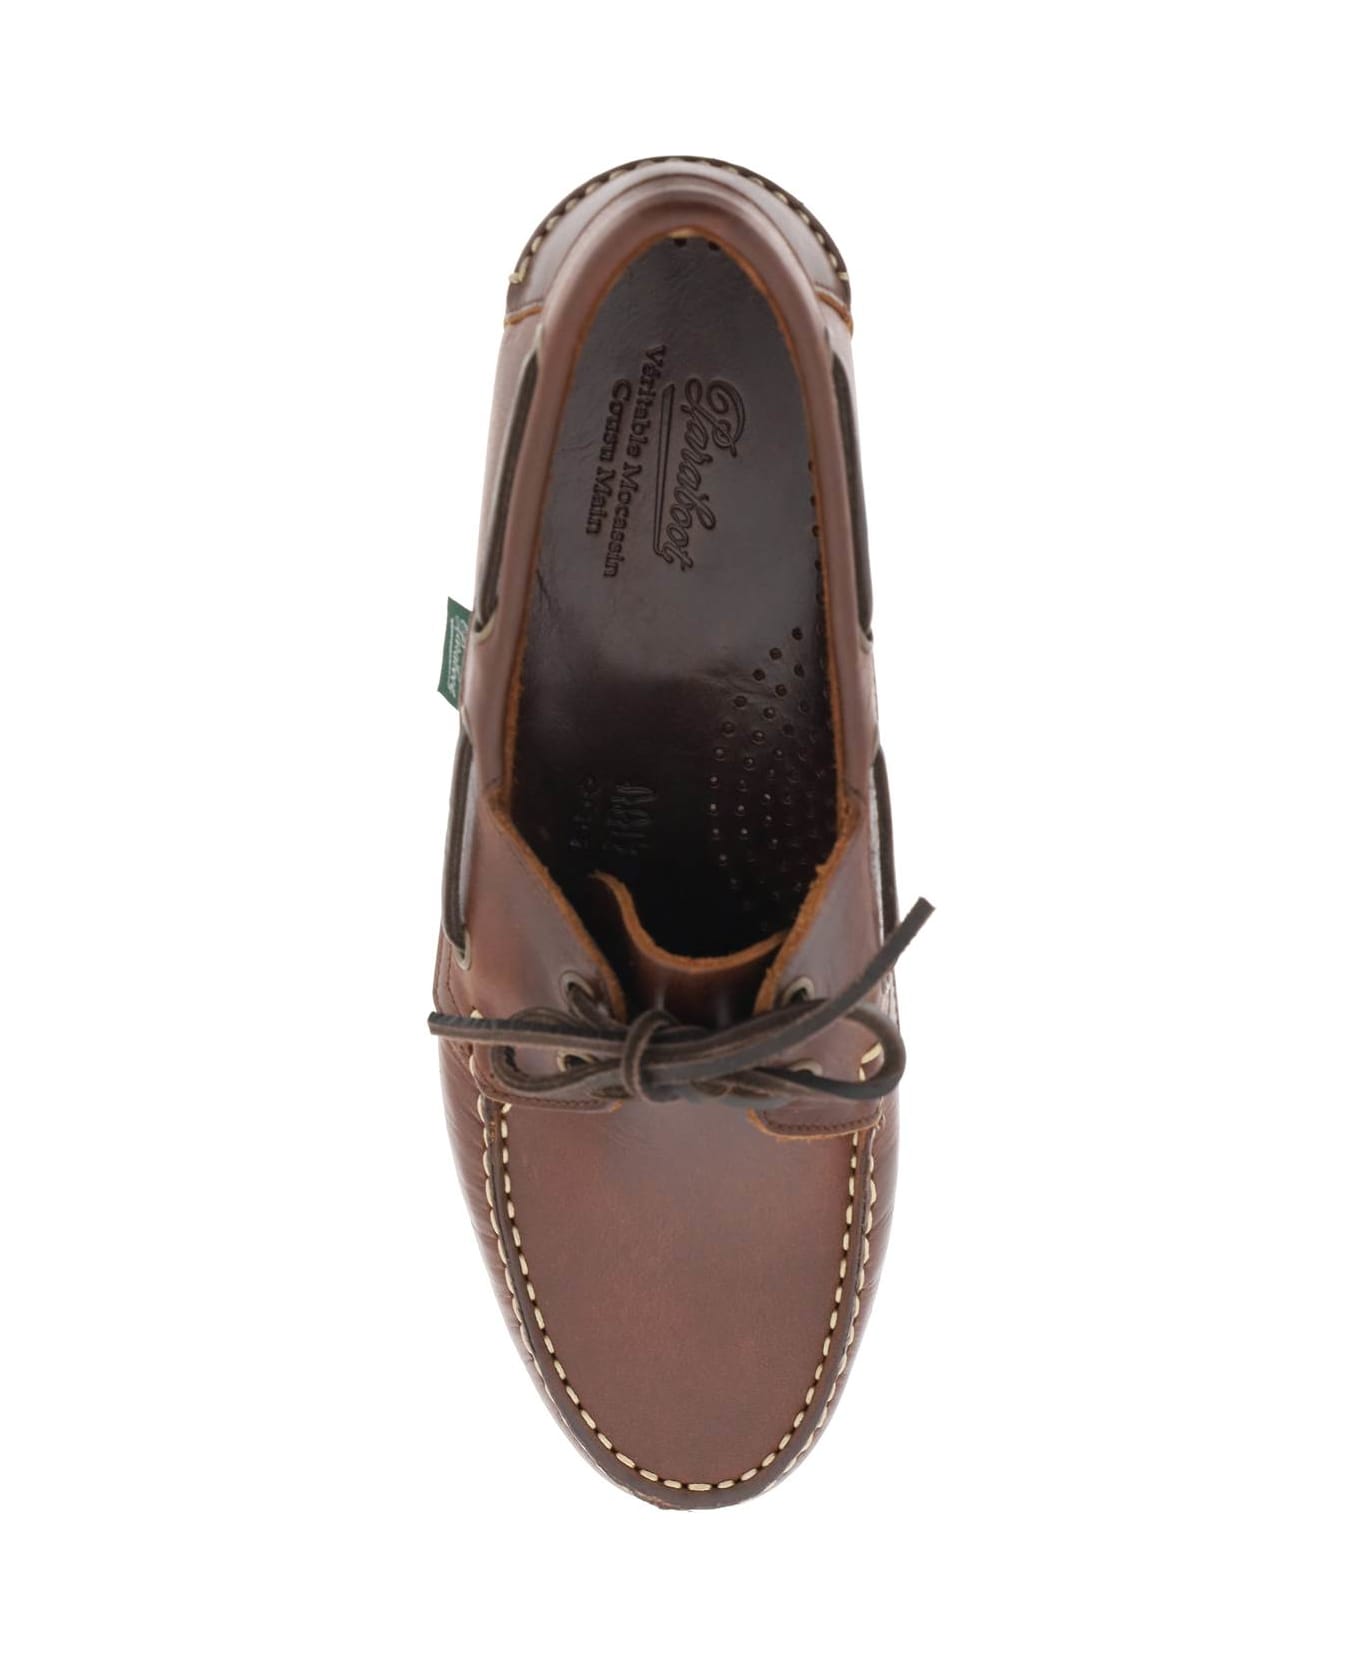 Paraboot Barth Loafers - MARRON LIS AMERICA (Brown)